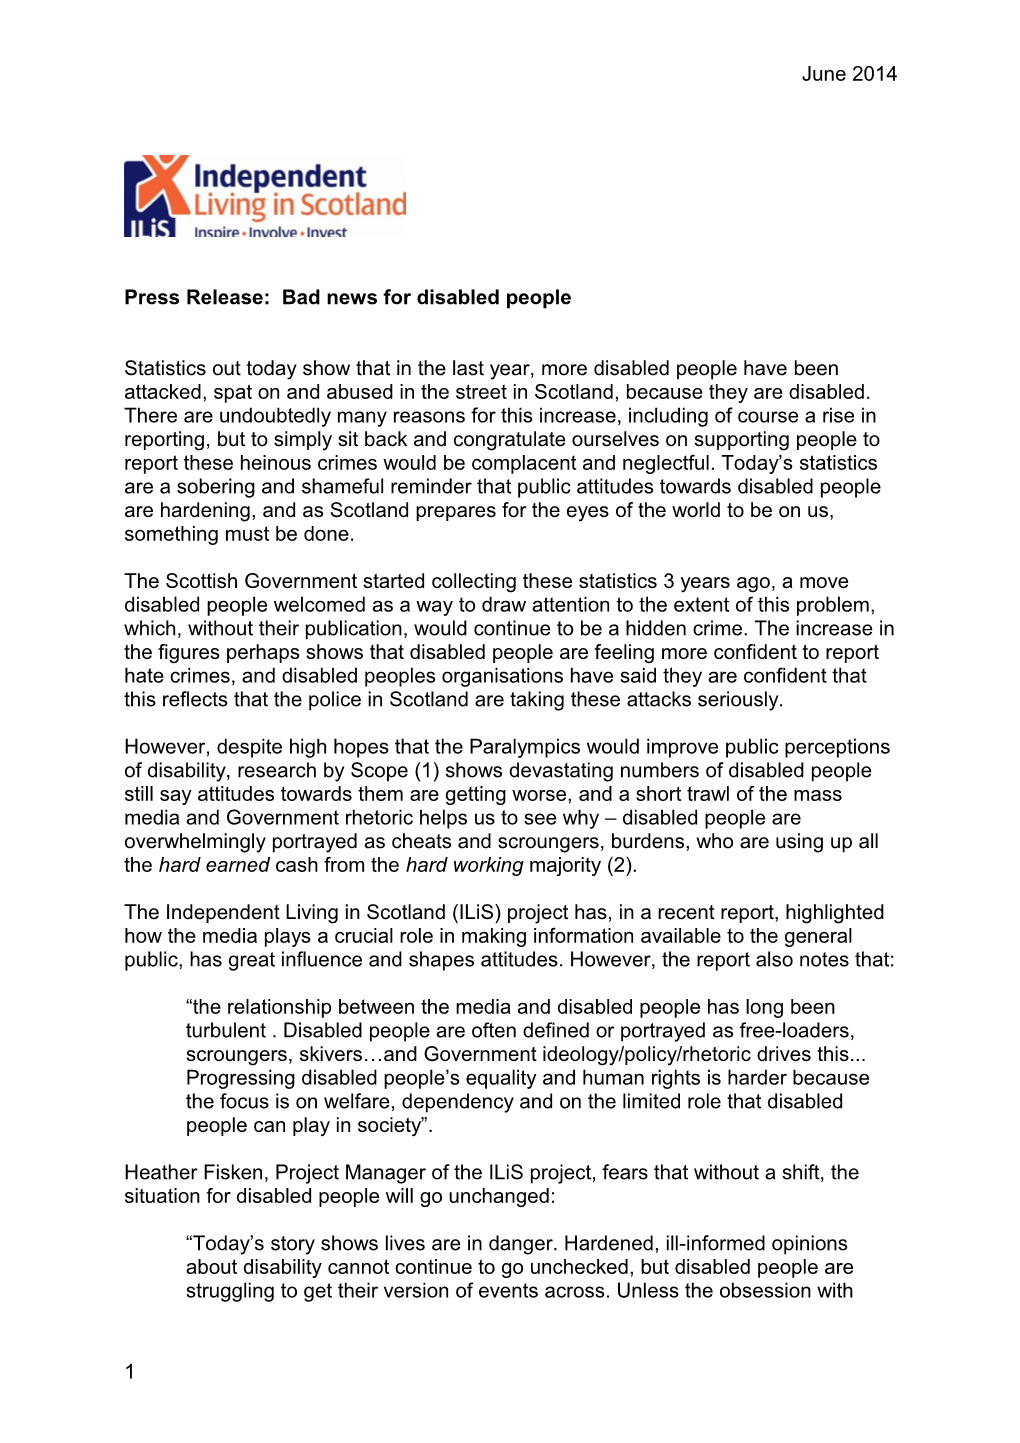 Press Release: Bad News for Disabled People